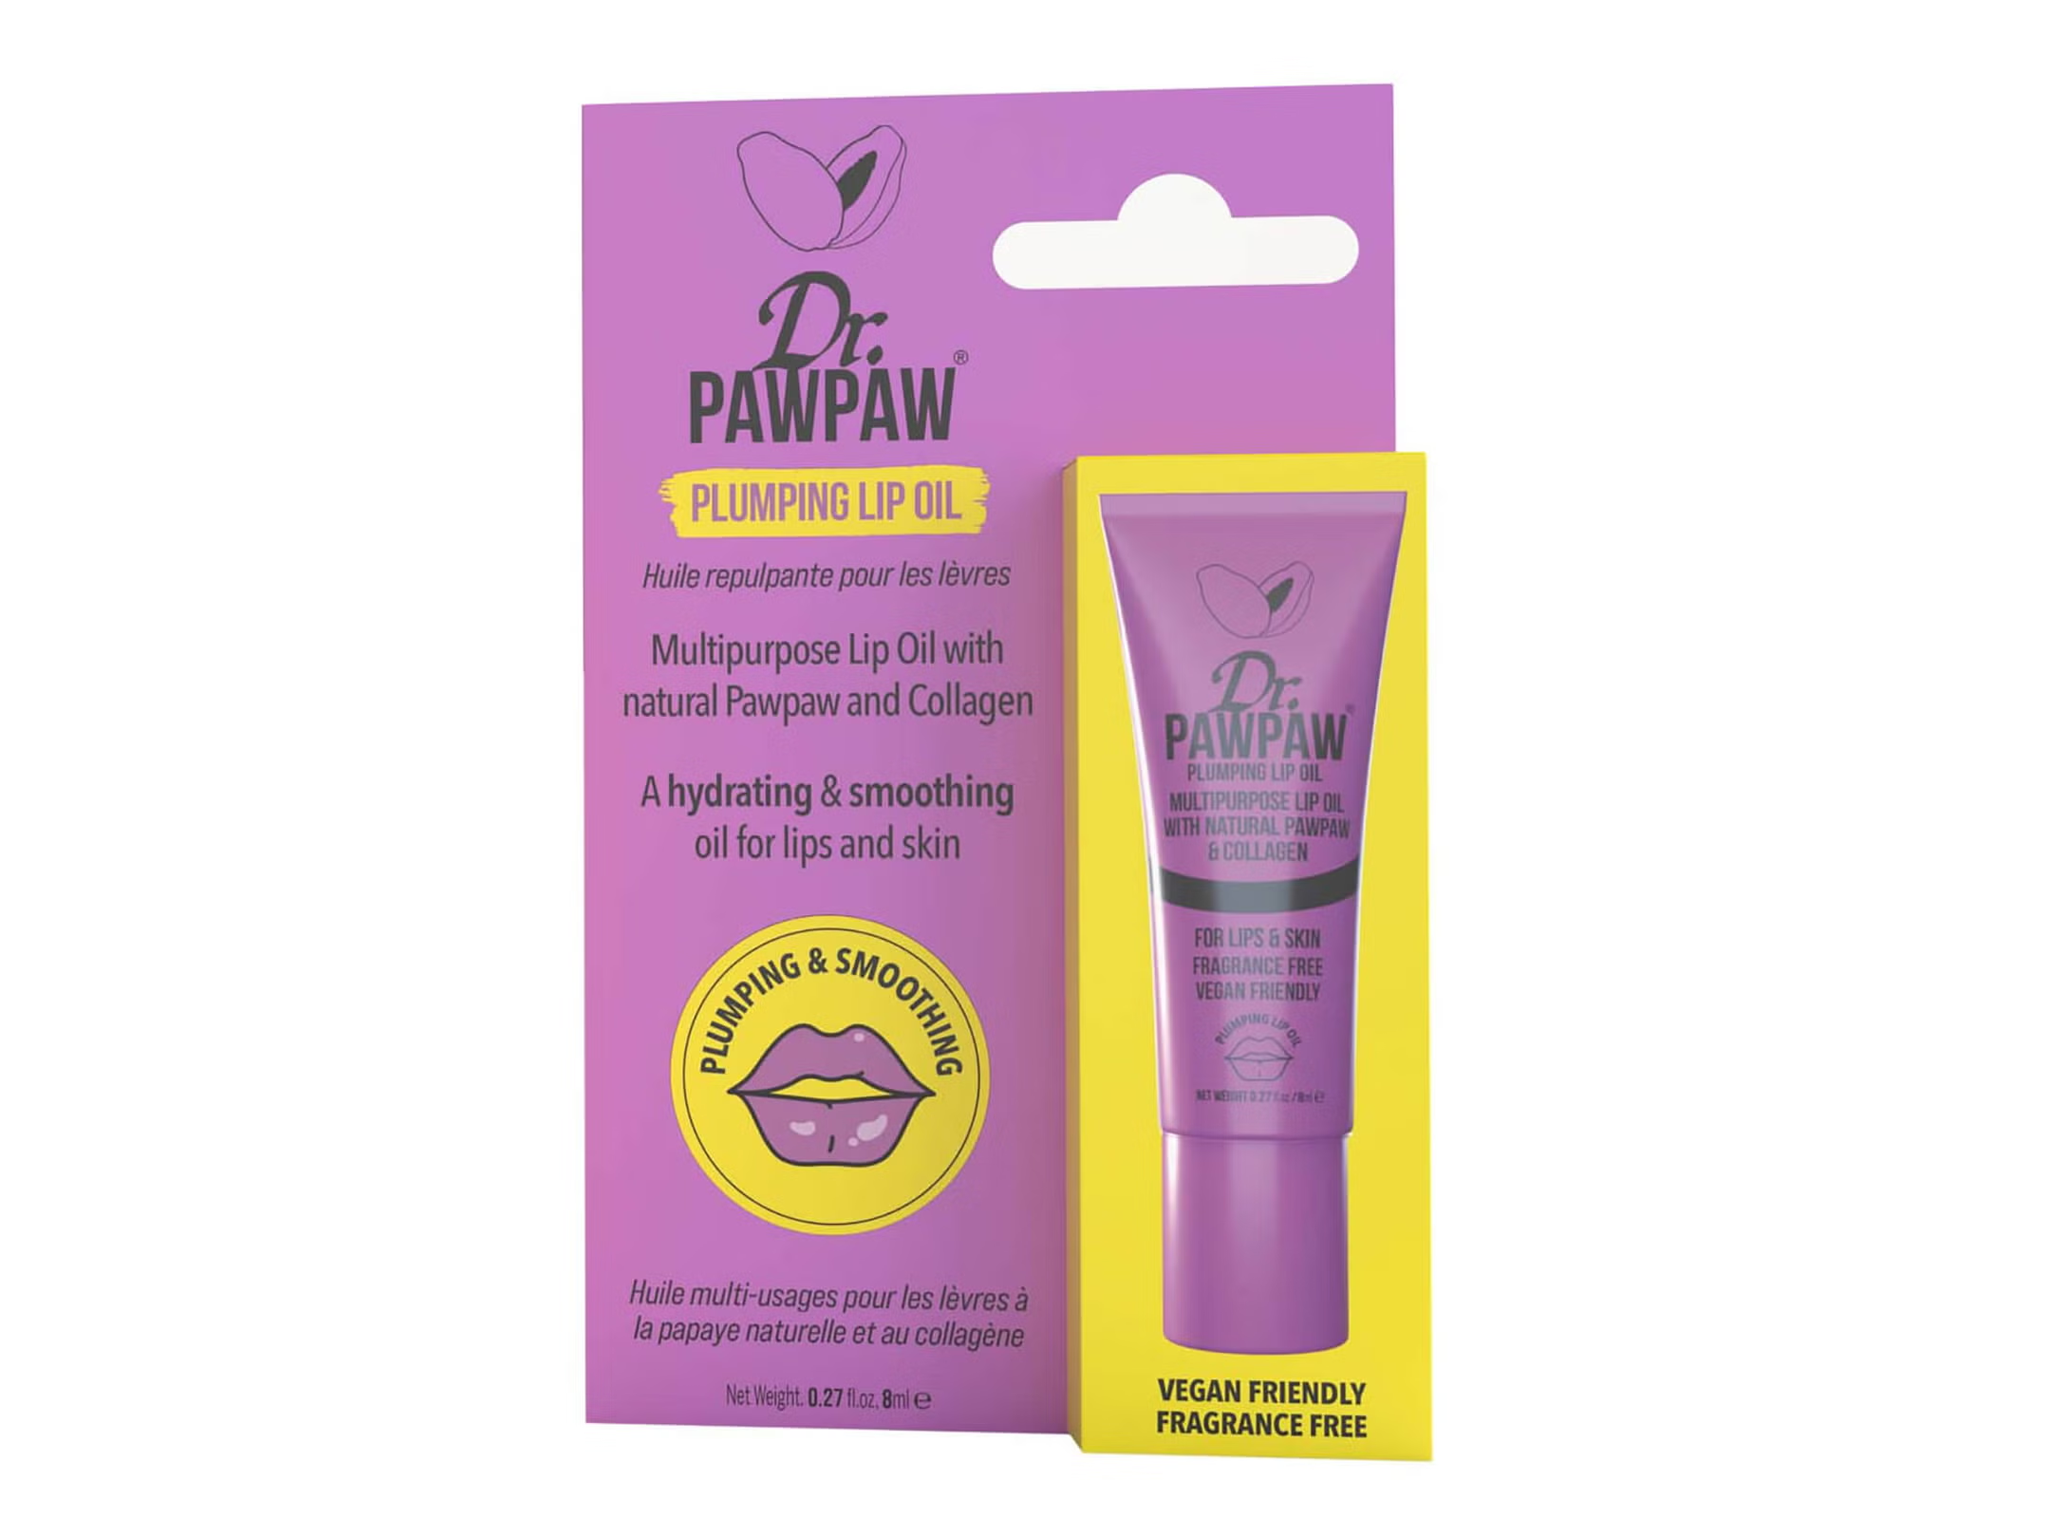 Dr Paw Paw plumping lip oil review 